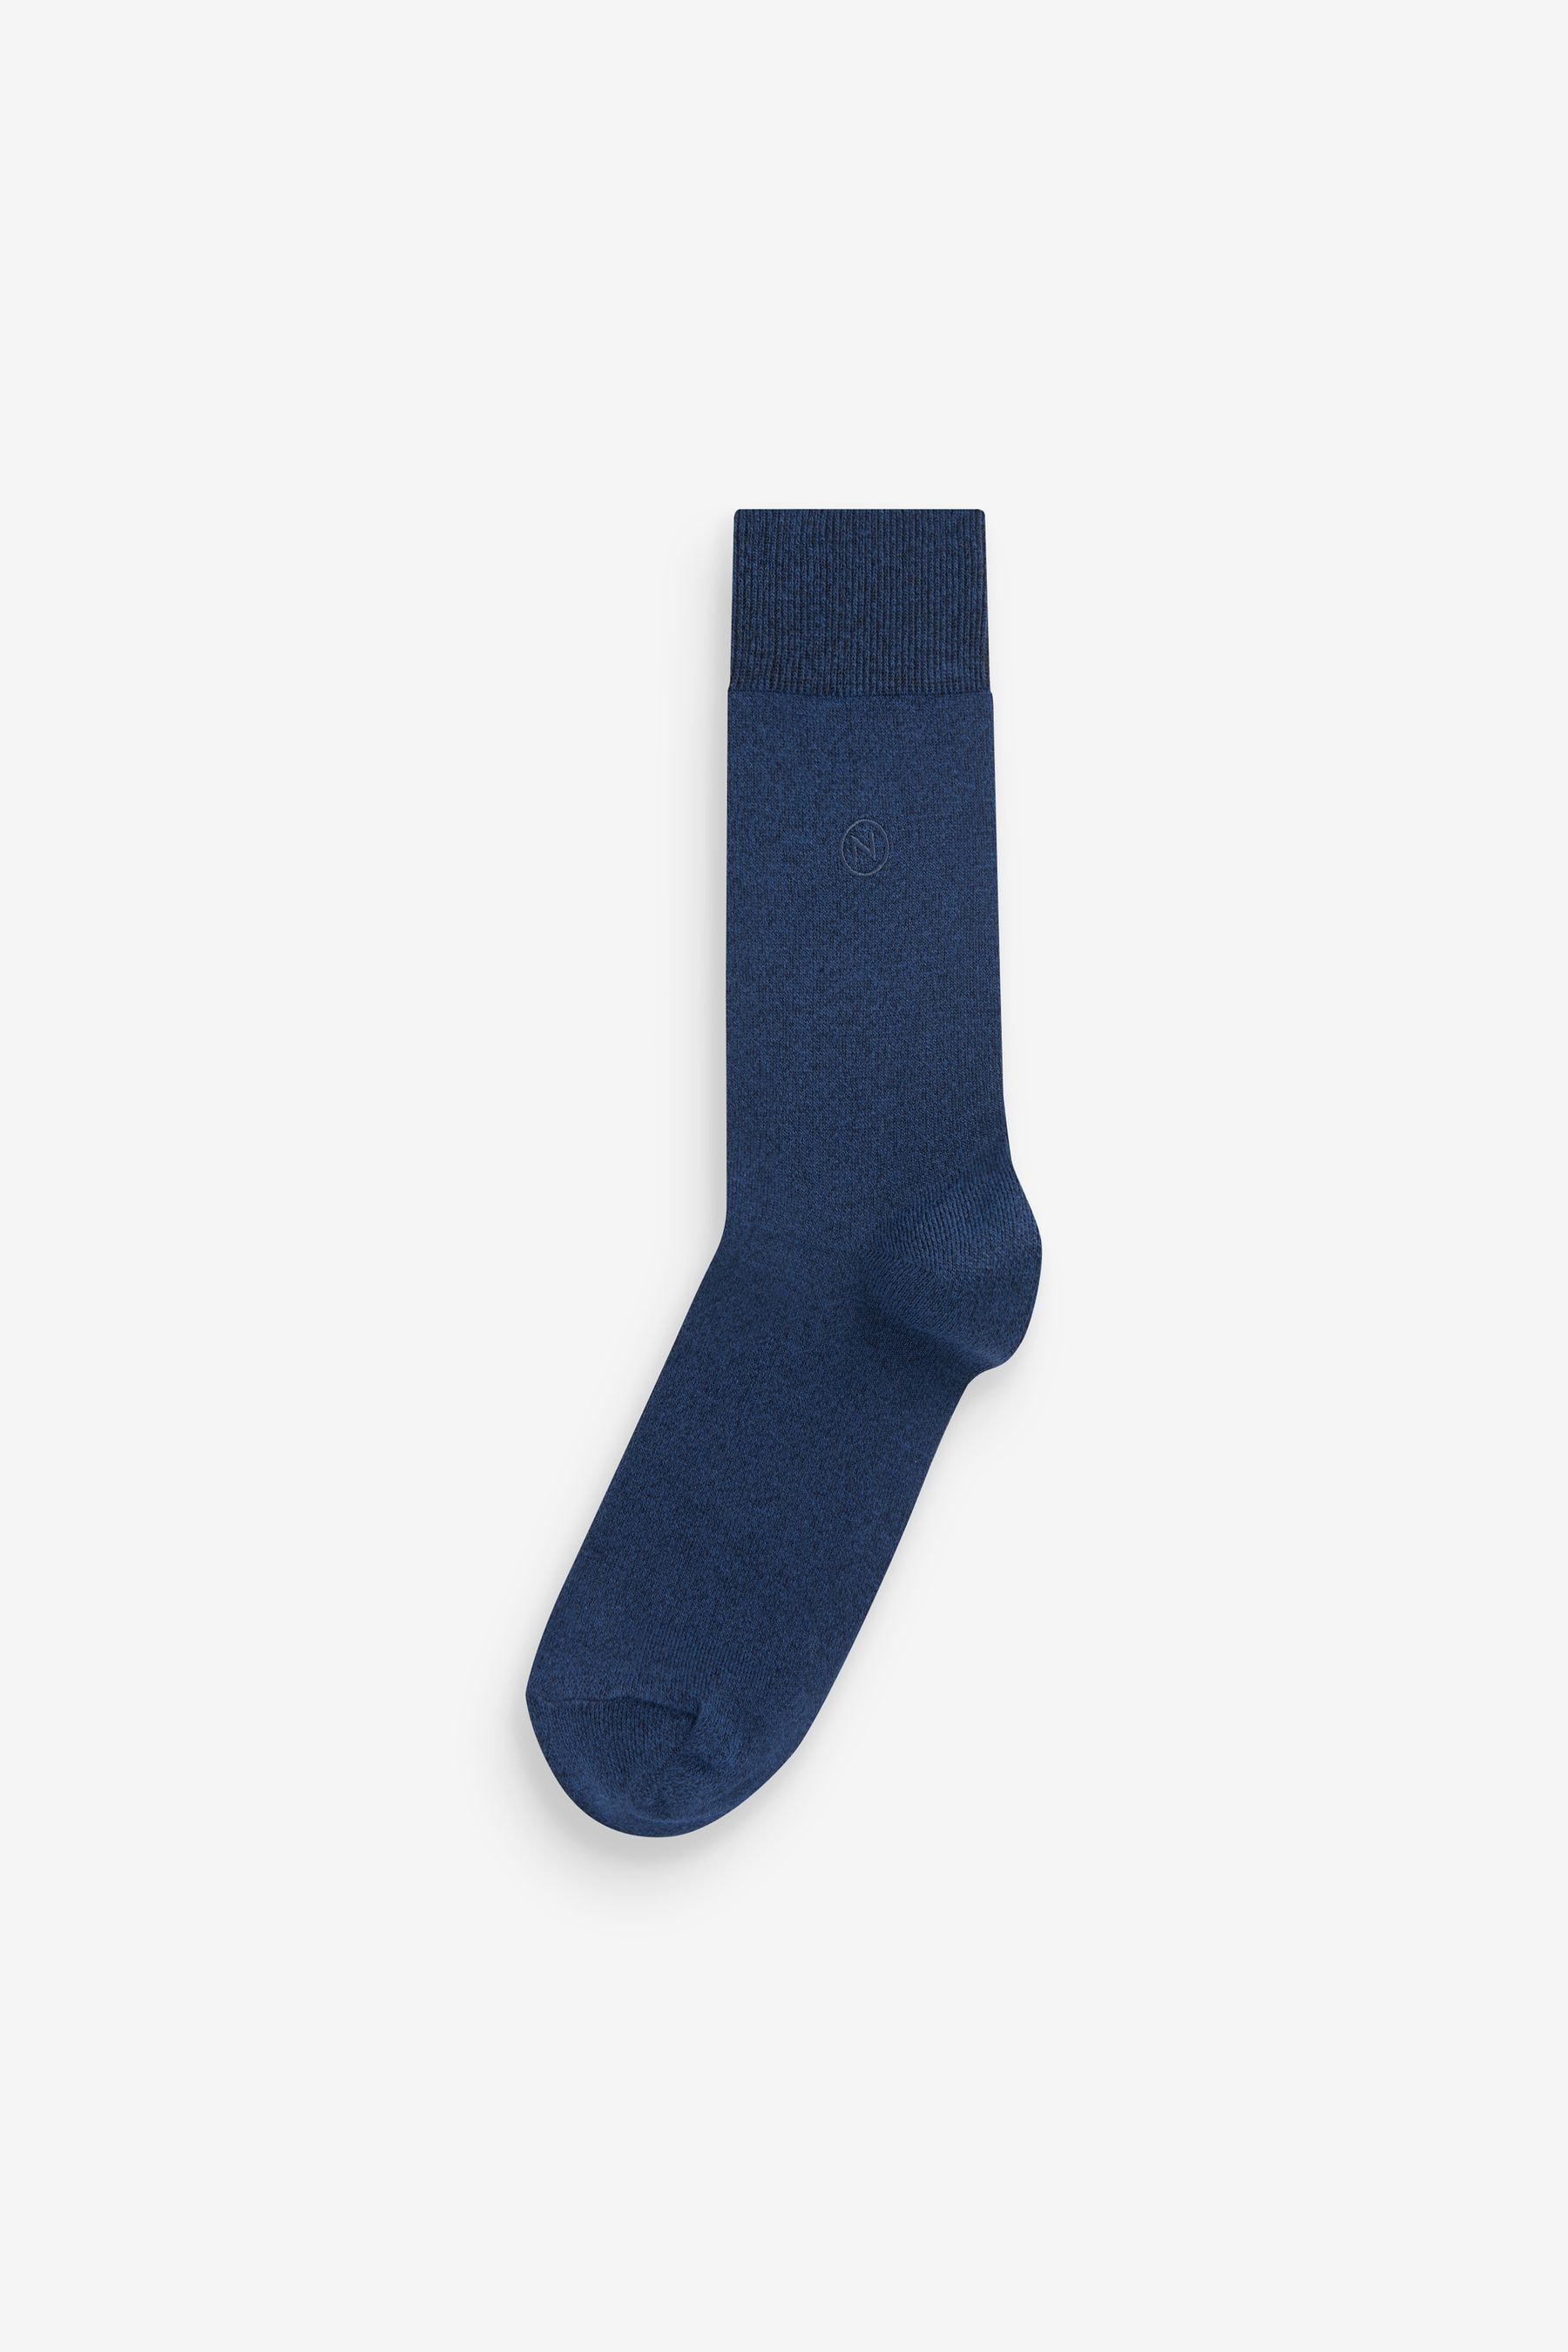 Buy Blue/Navy 5 Pack Embroidered Lasting Fresh Socks from the Next UK ...